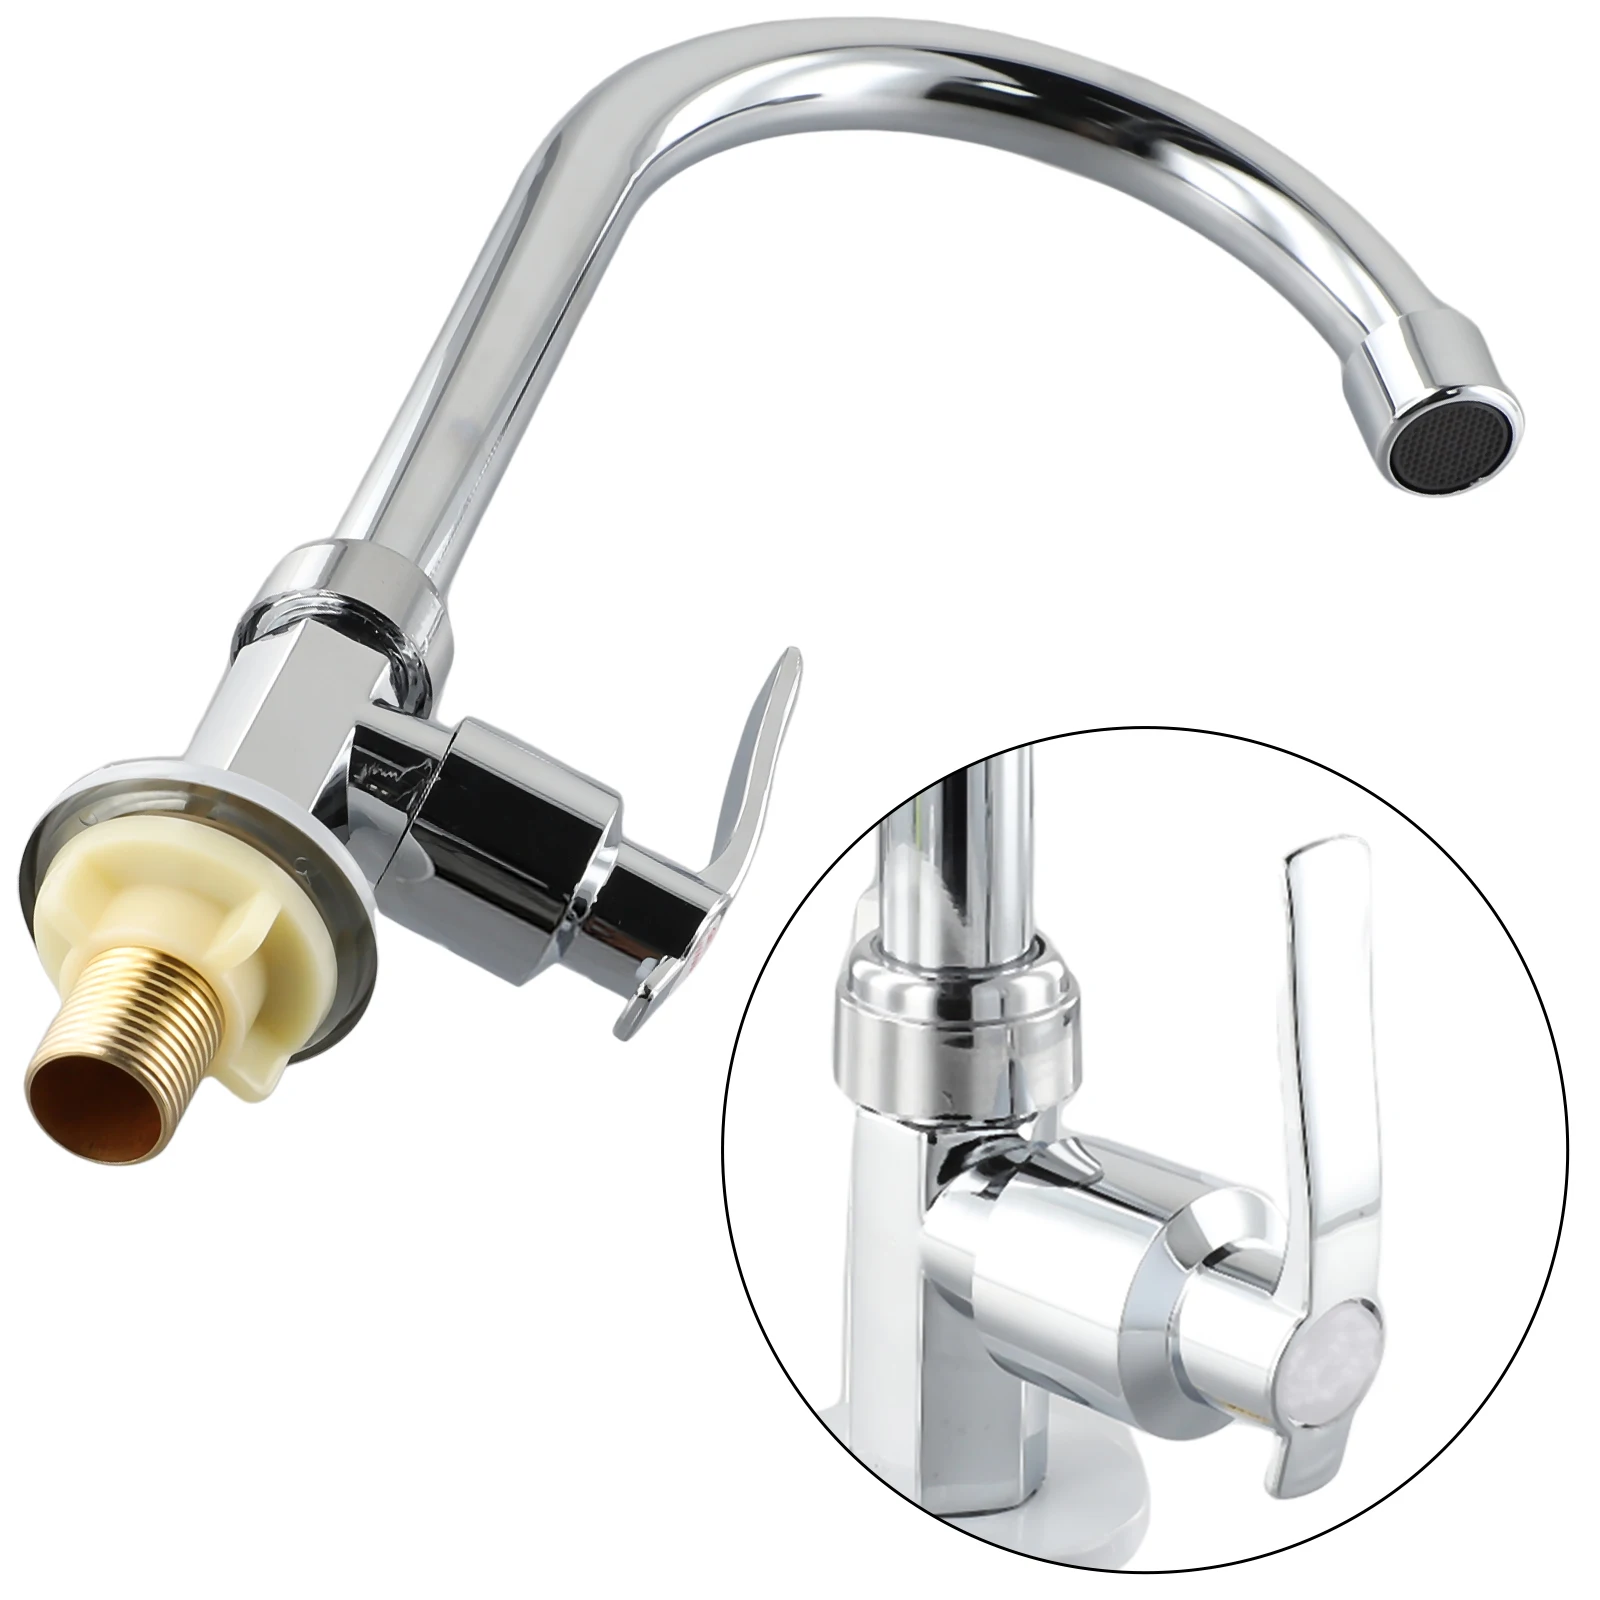 Swivel Spout Kitchen Faucet Kitchen Faucet Plating Silver Single Cold Water Stainless Steel Bars Bathrooms Parts 4